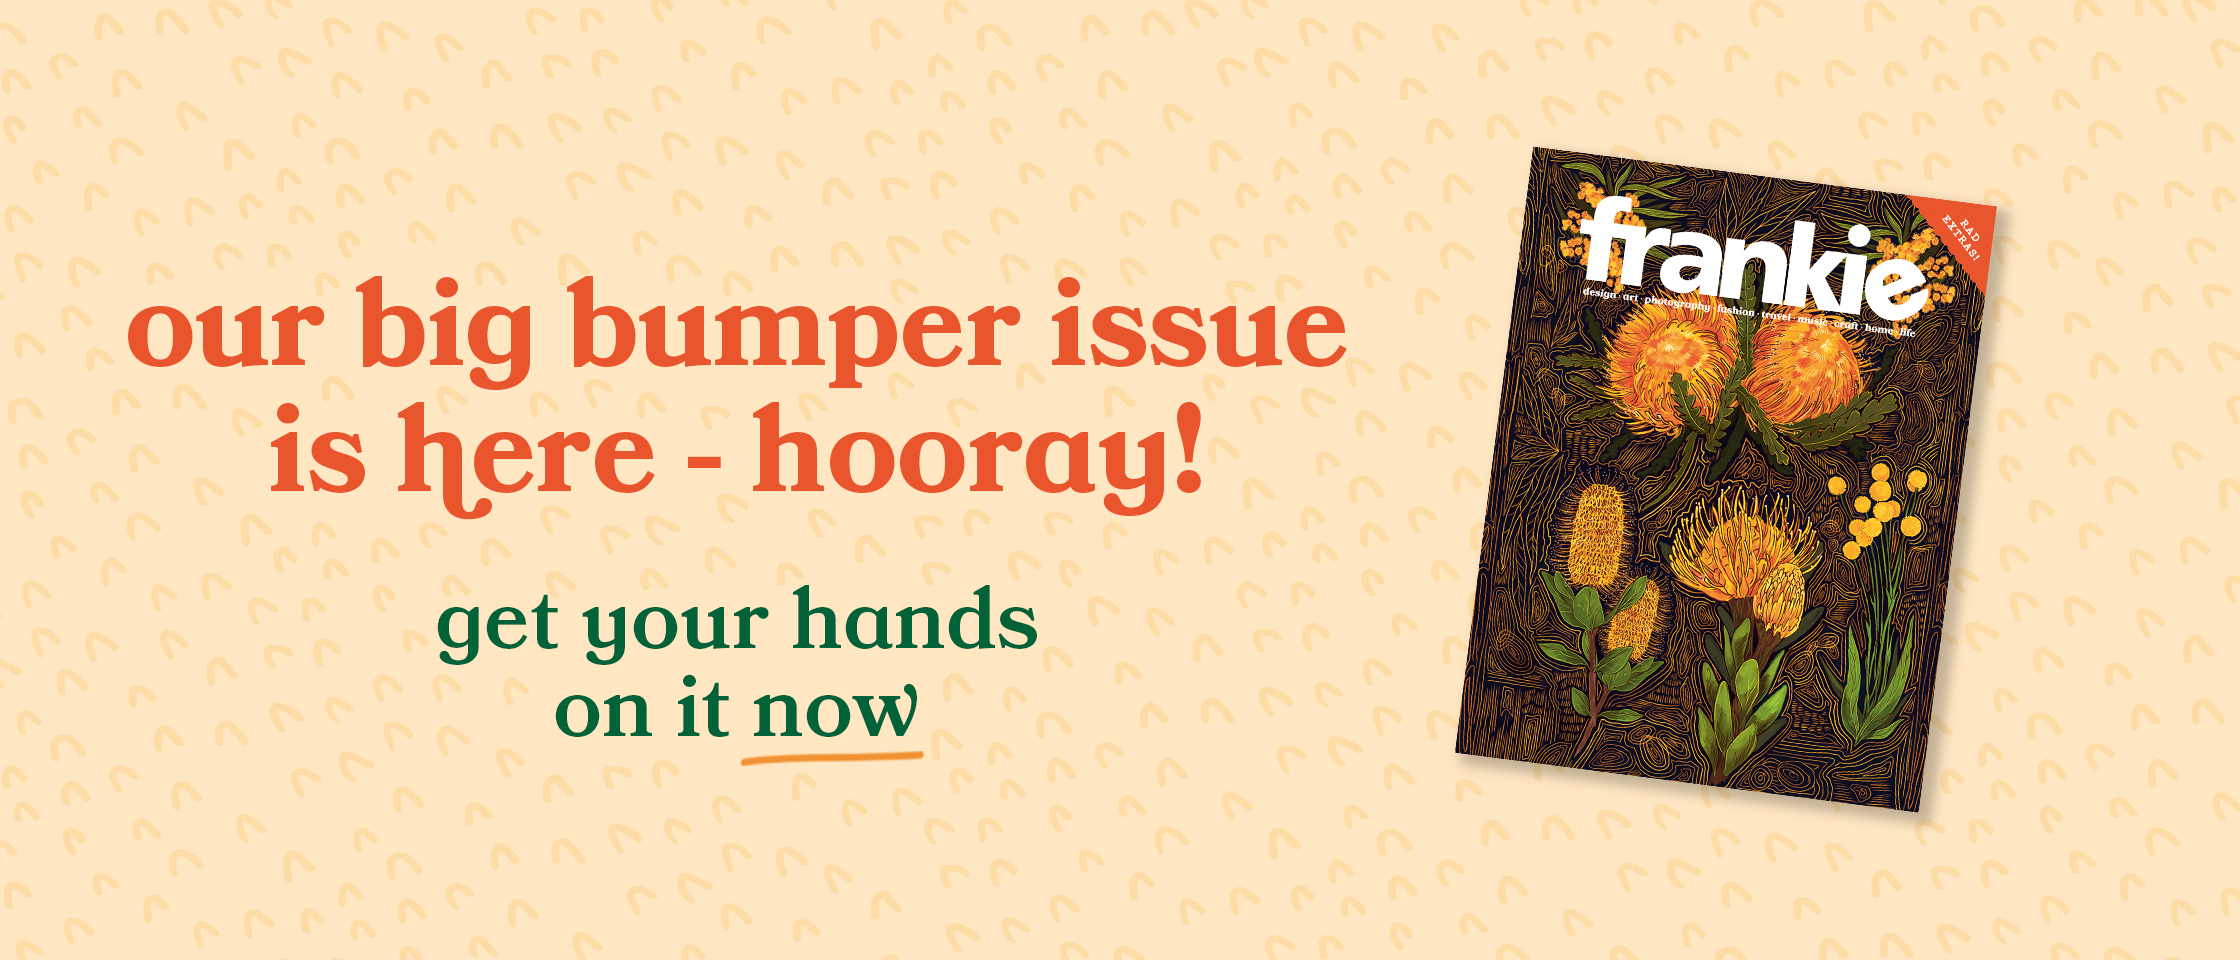 issue 105 is here - hooray!